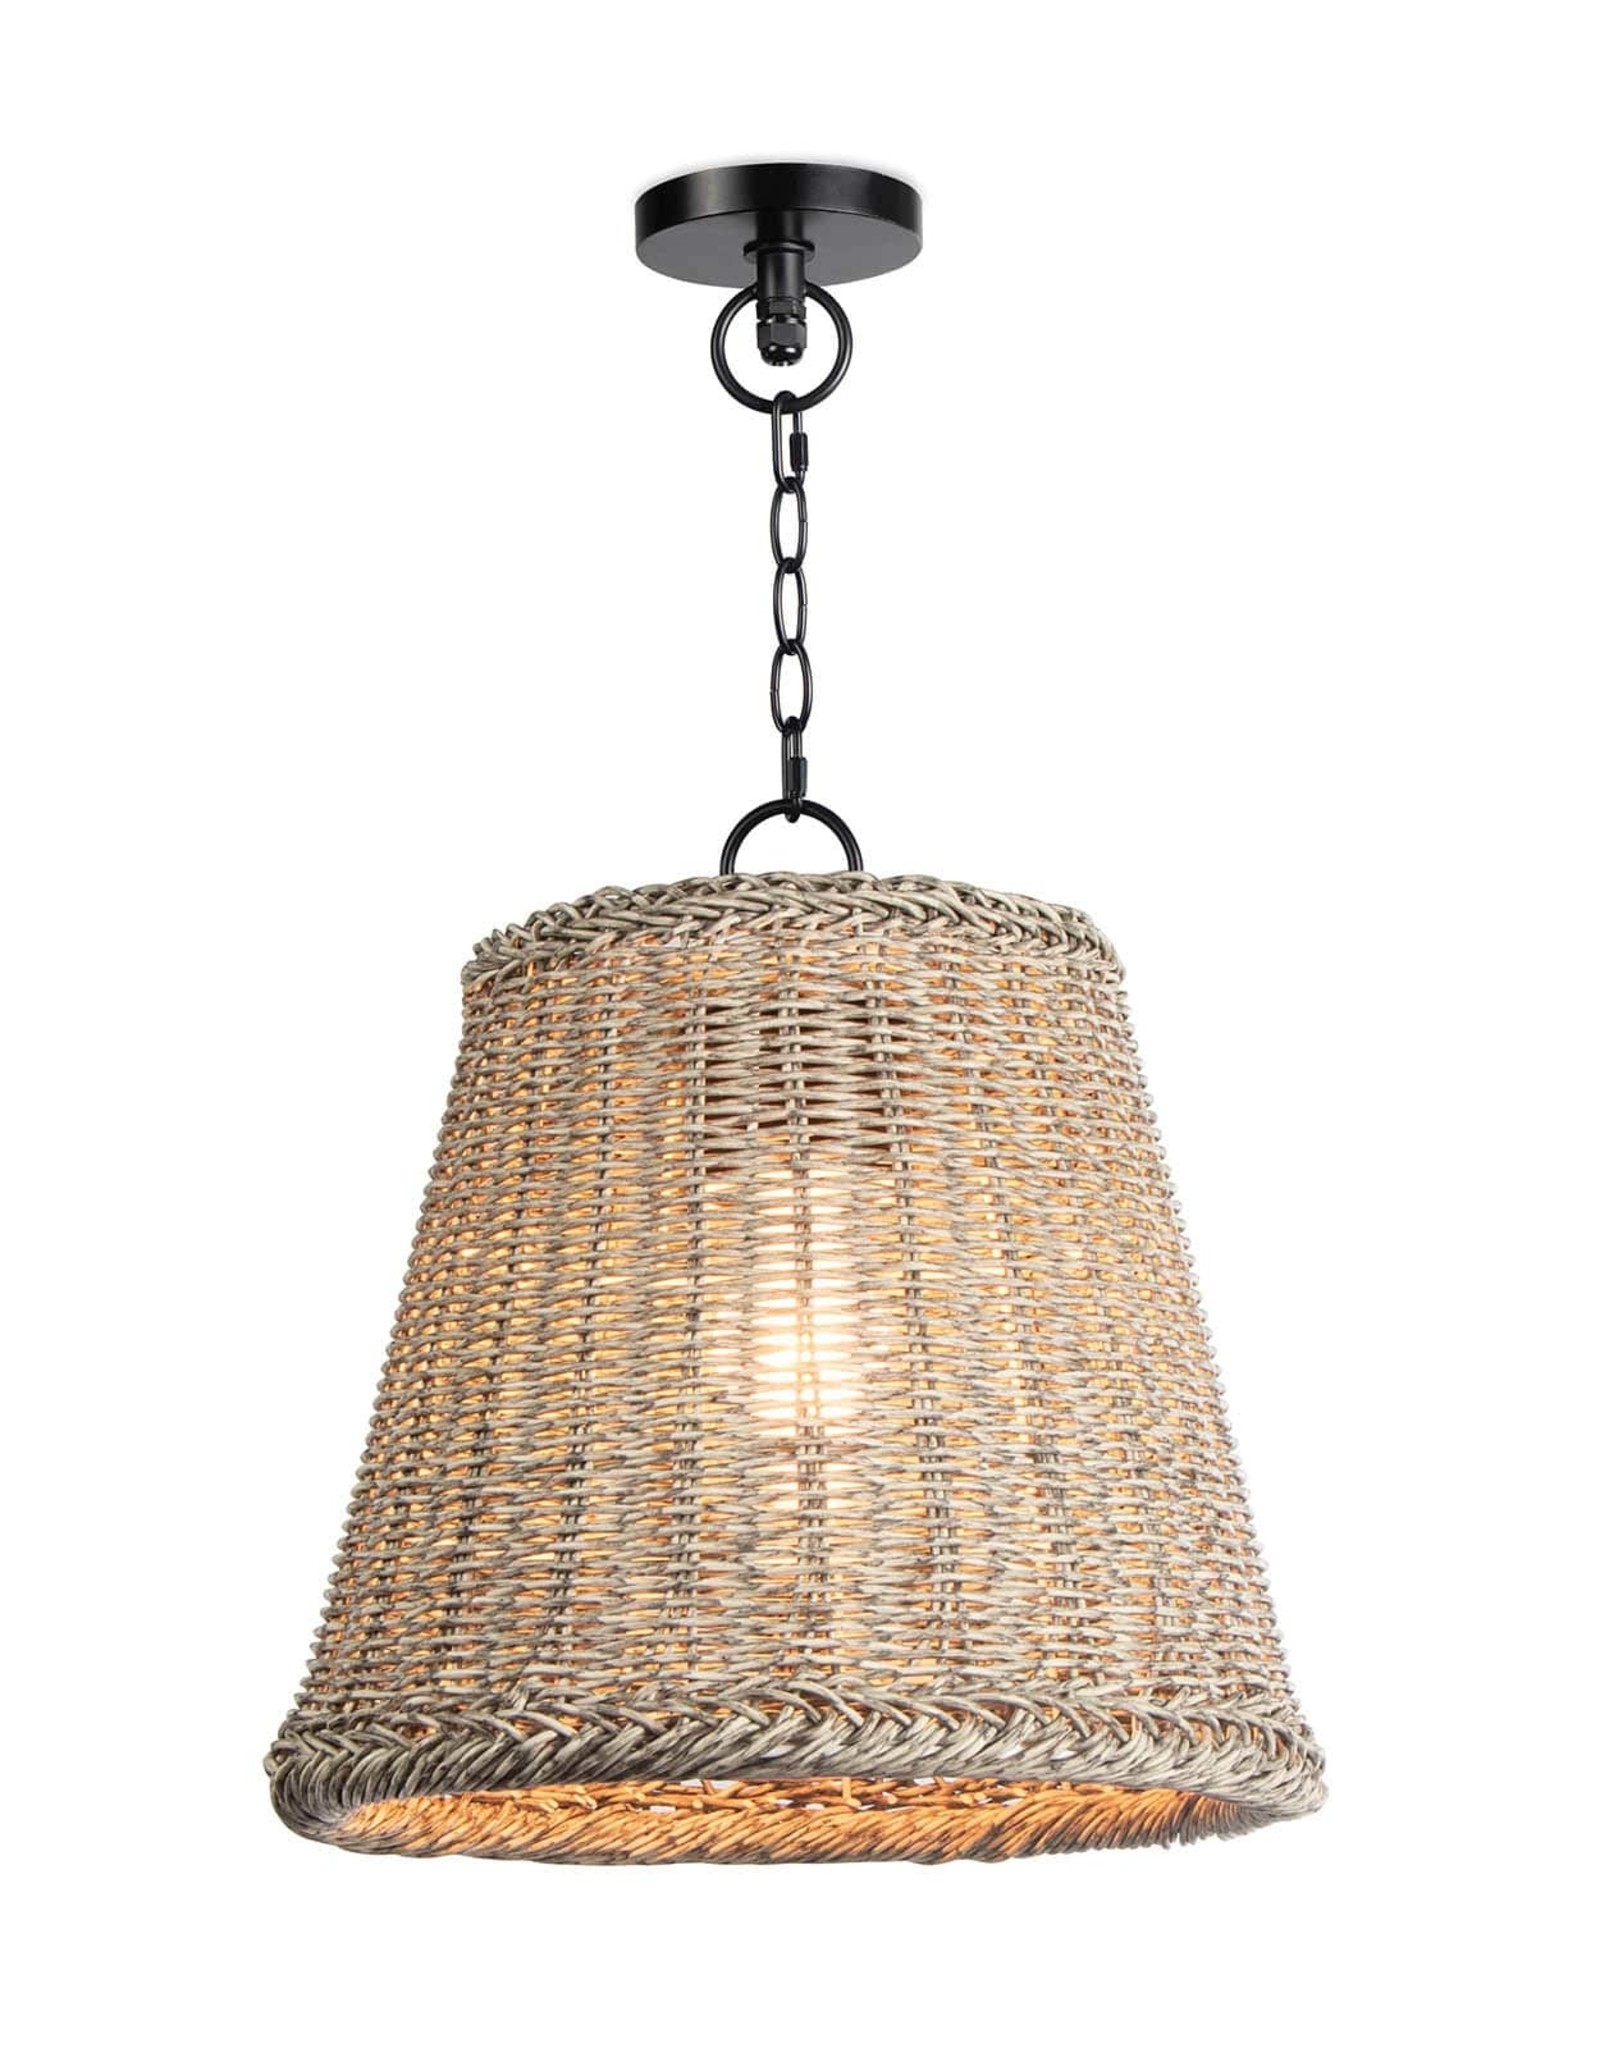 Coastal Living Augustine Outdoor Pendant Small (Weathered White)